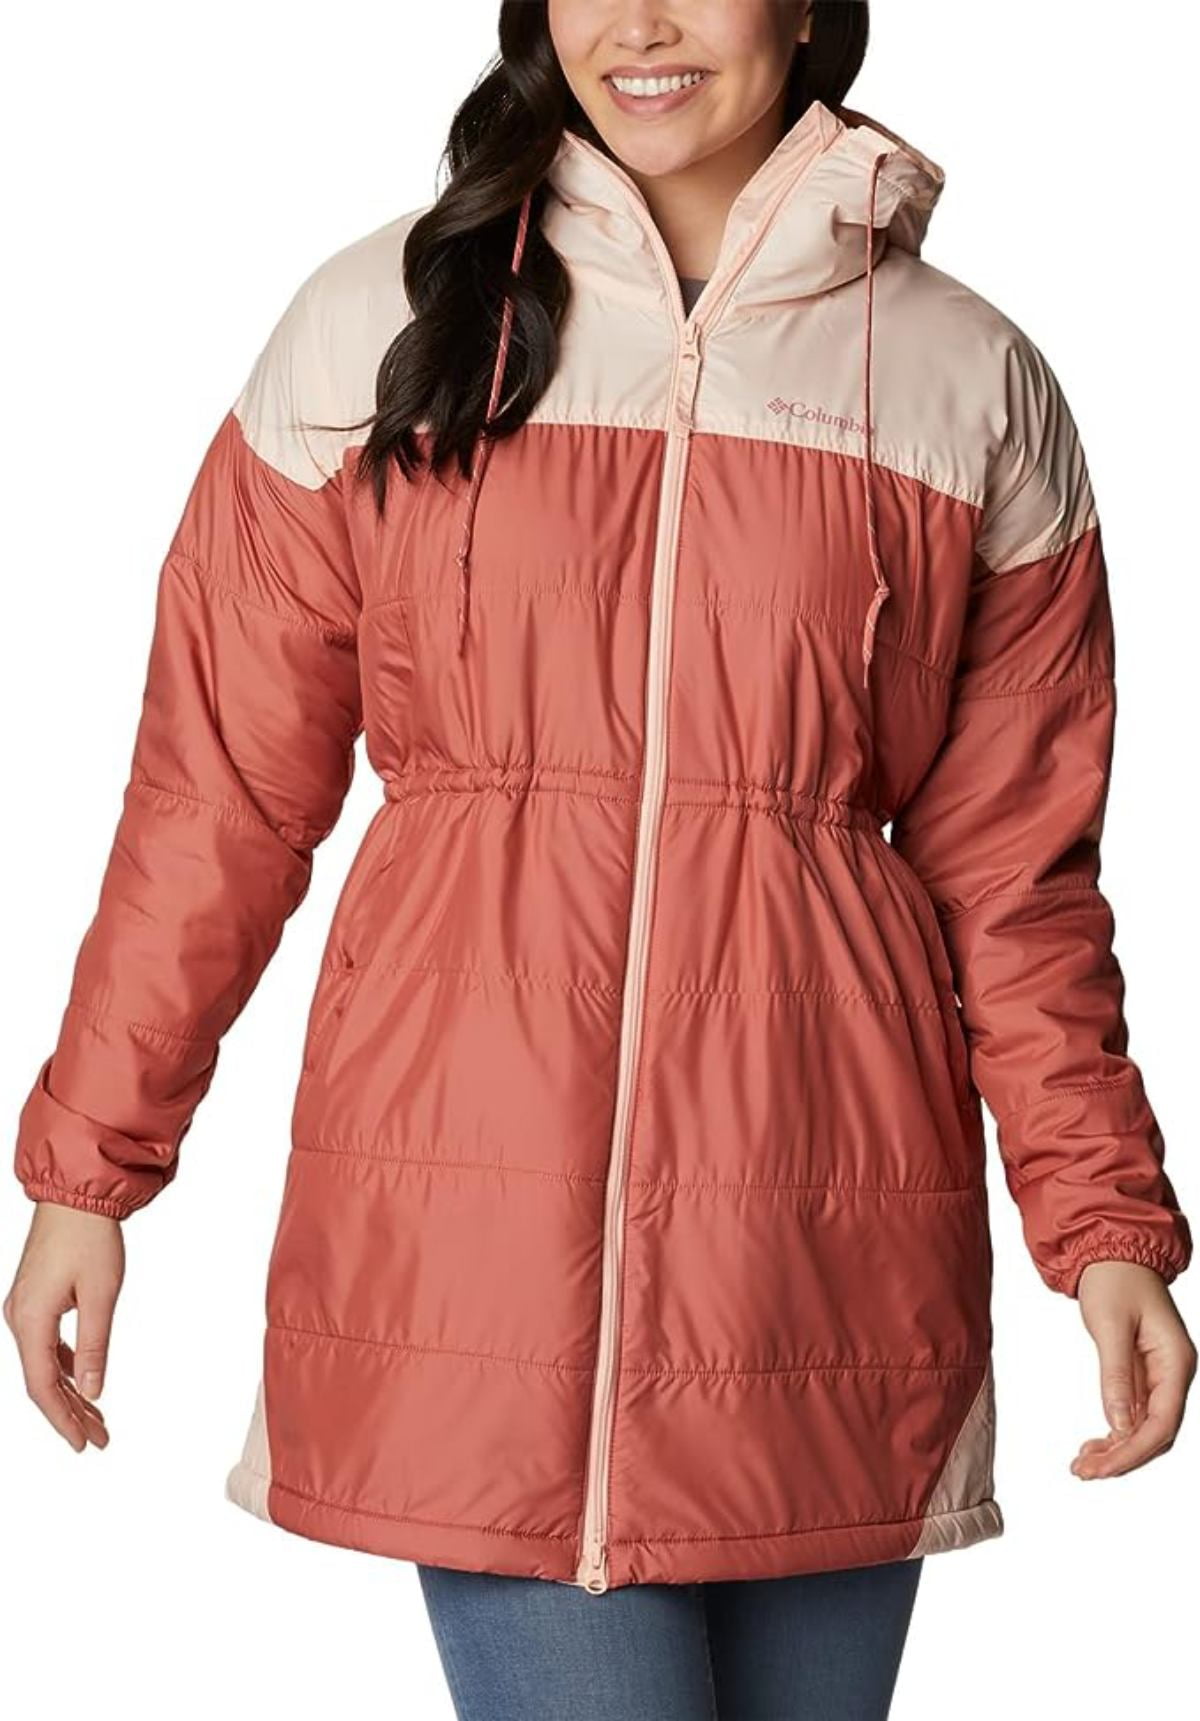 Long Lined XX-Large Women\'s Sherpa Coral/Peach Flash Challenger Columbia Dark Blossom, Jacket,